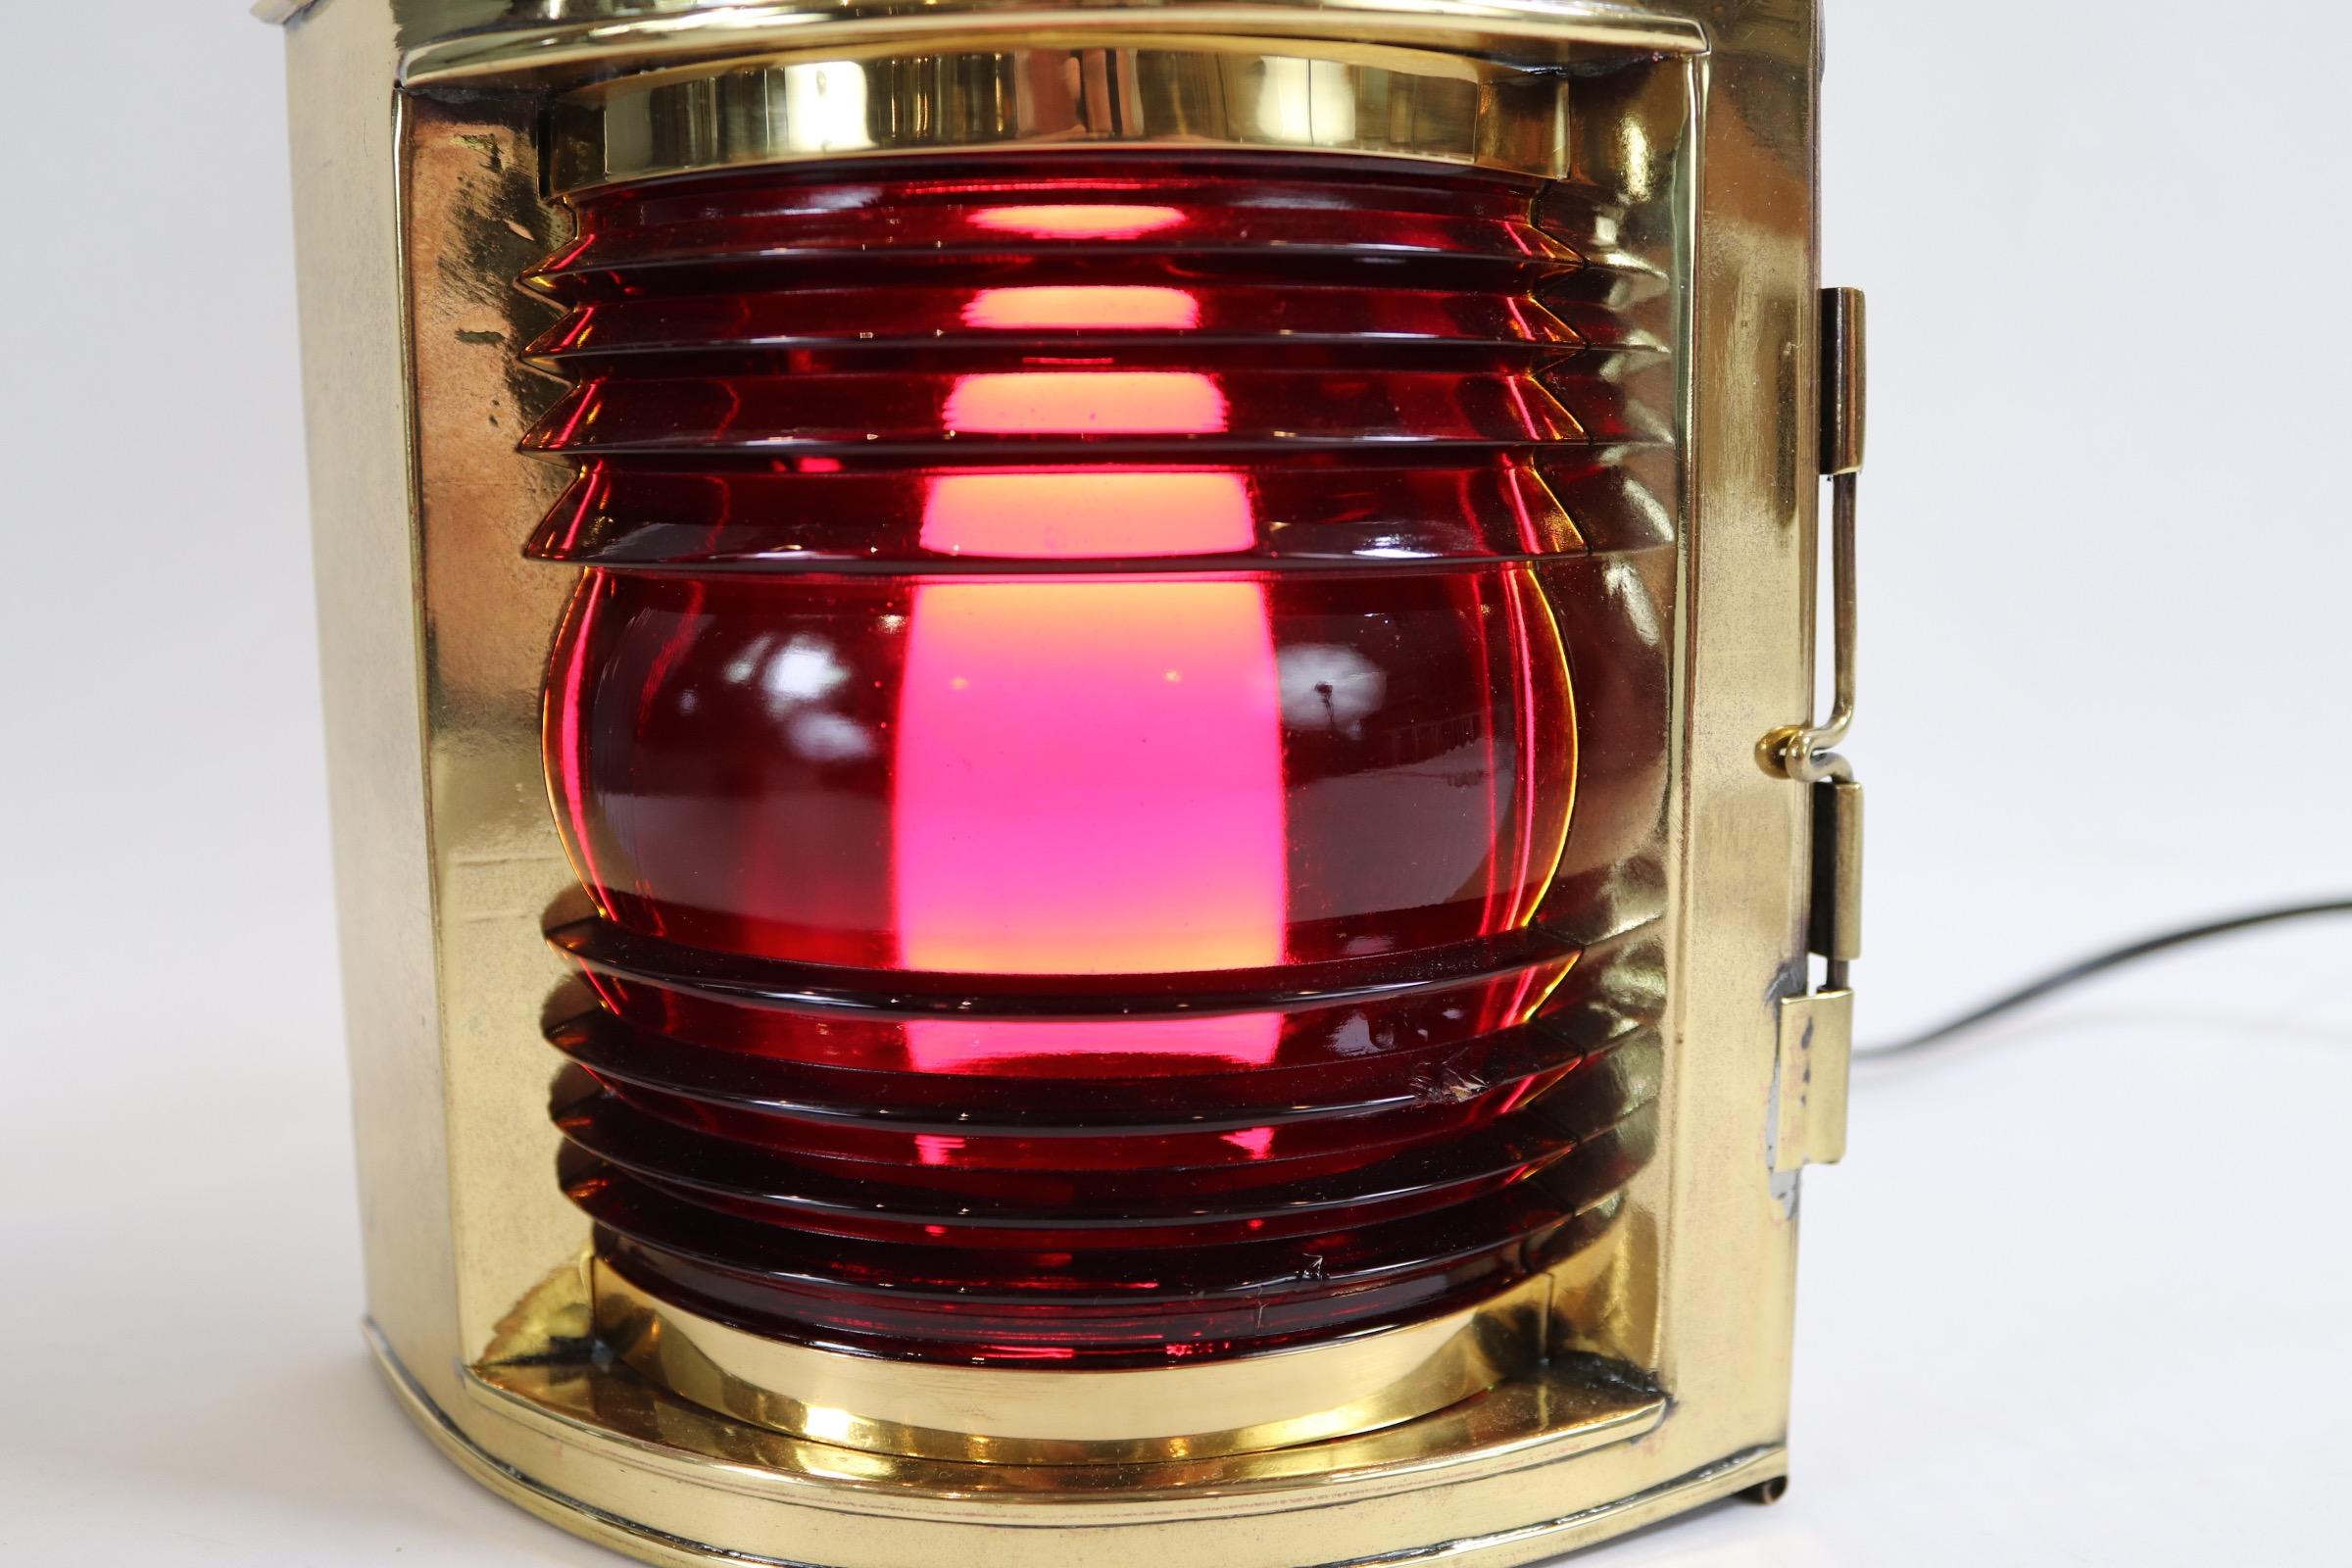 Highly polished and lacquered ship lantern with large hoop handle, hinged door, vented top and electric socket for home display. Plate on top reads 